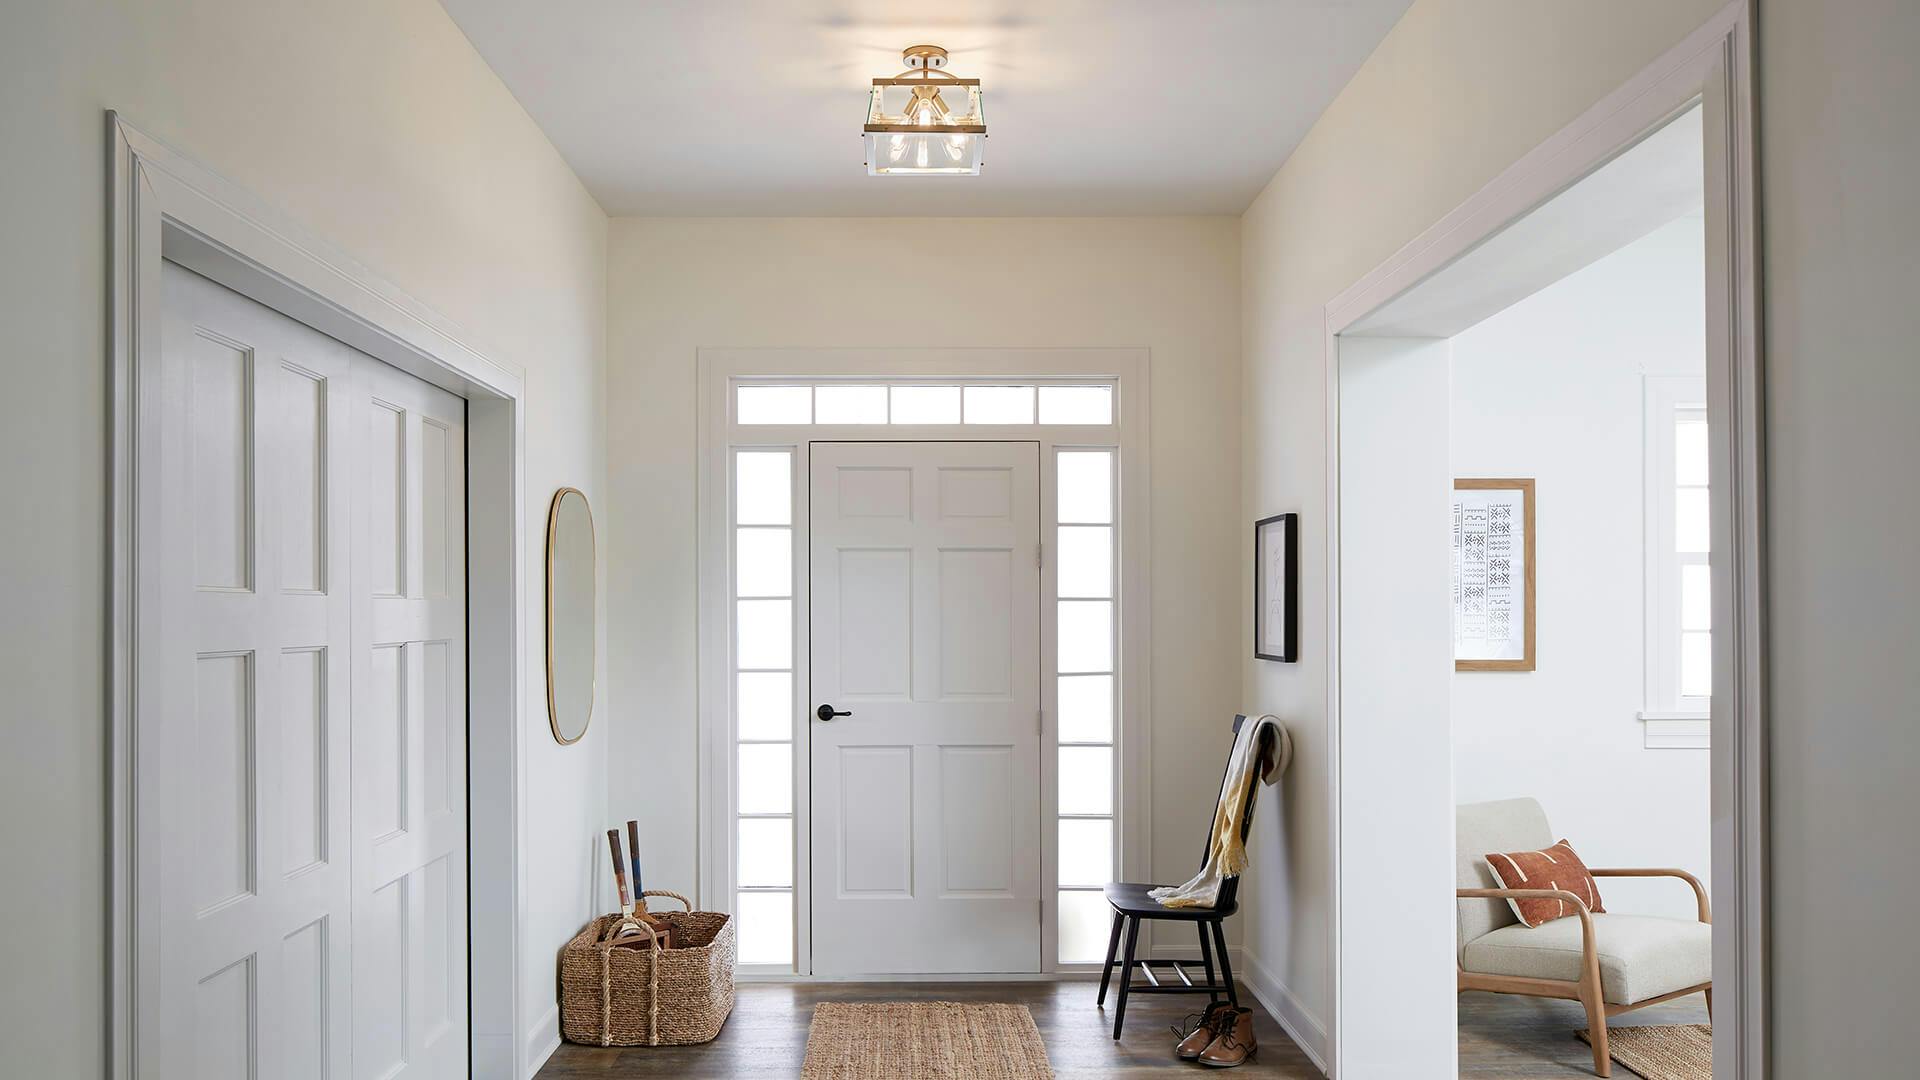 Entryway painted white with a Darton chandelier hanging above the front door